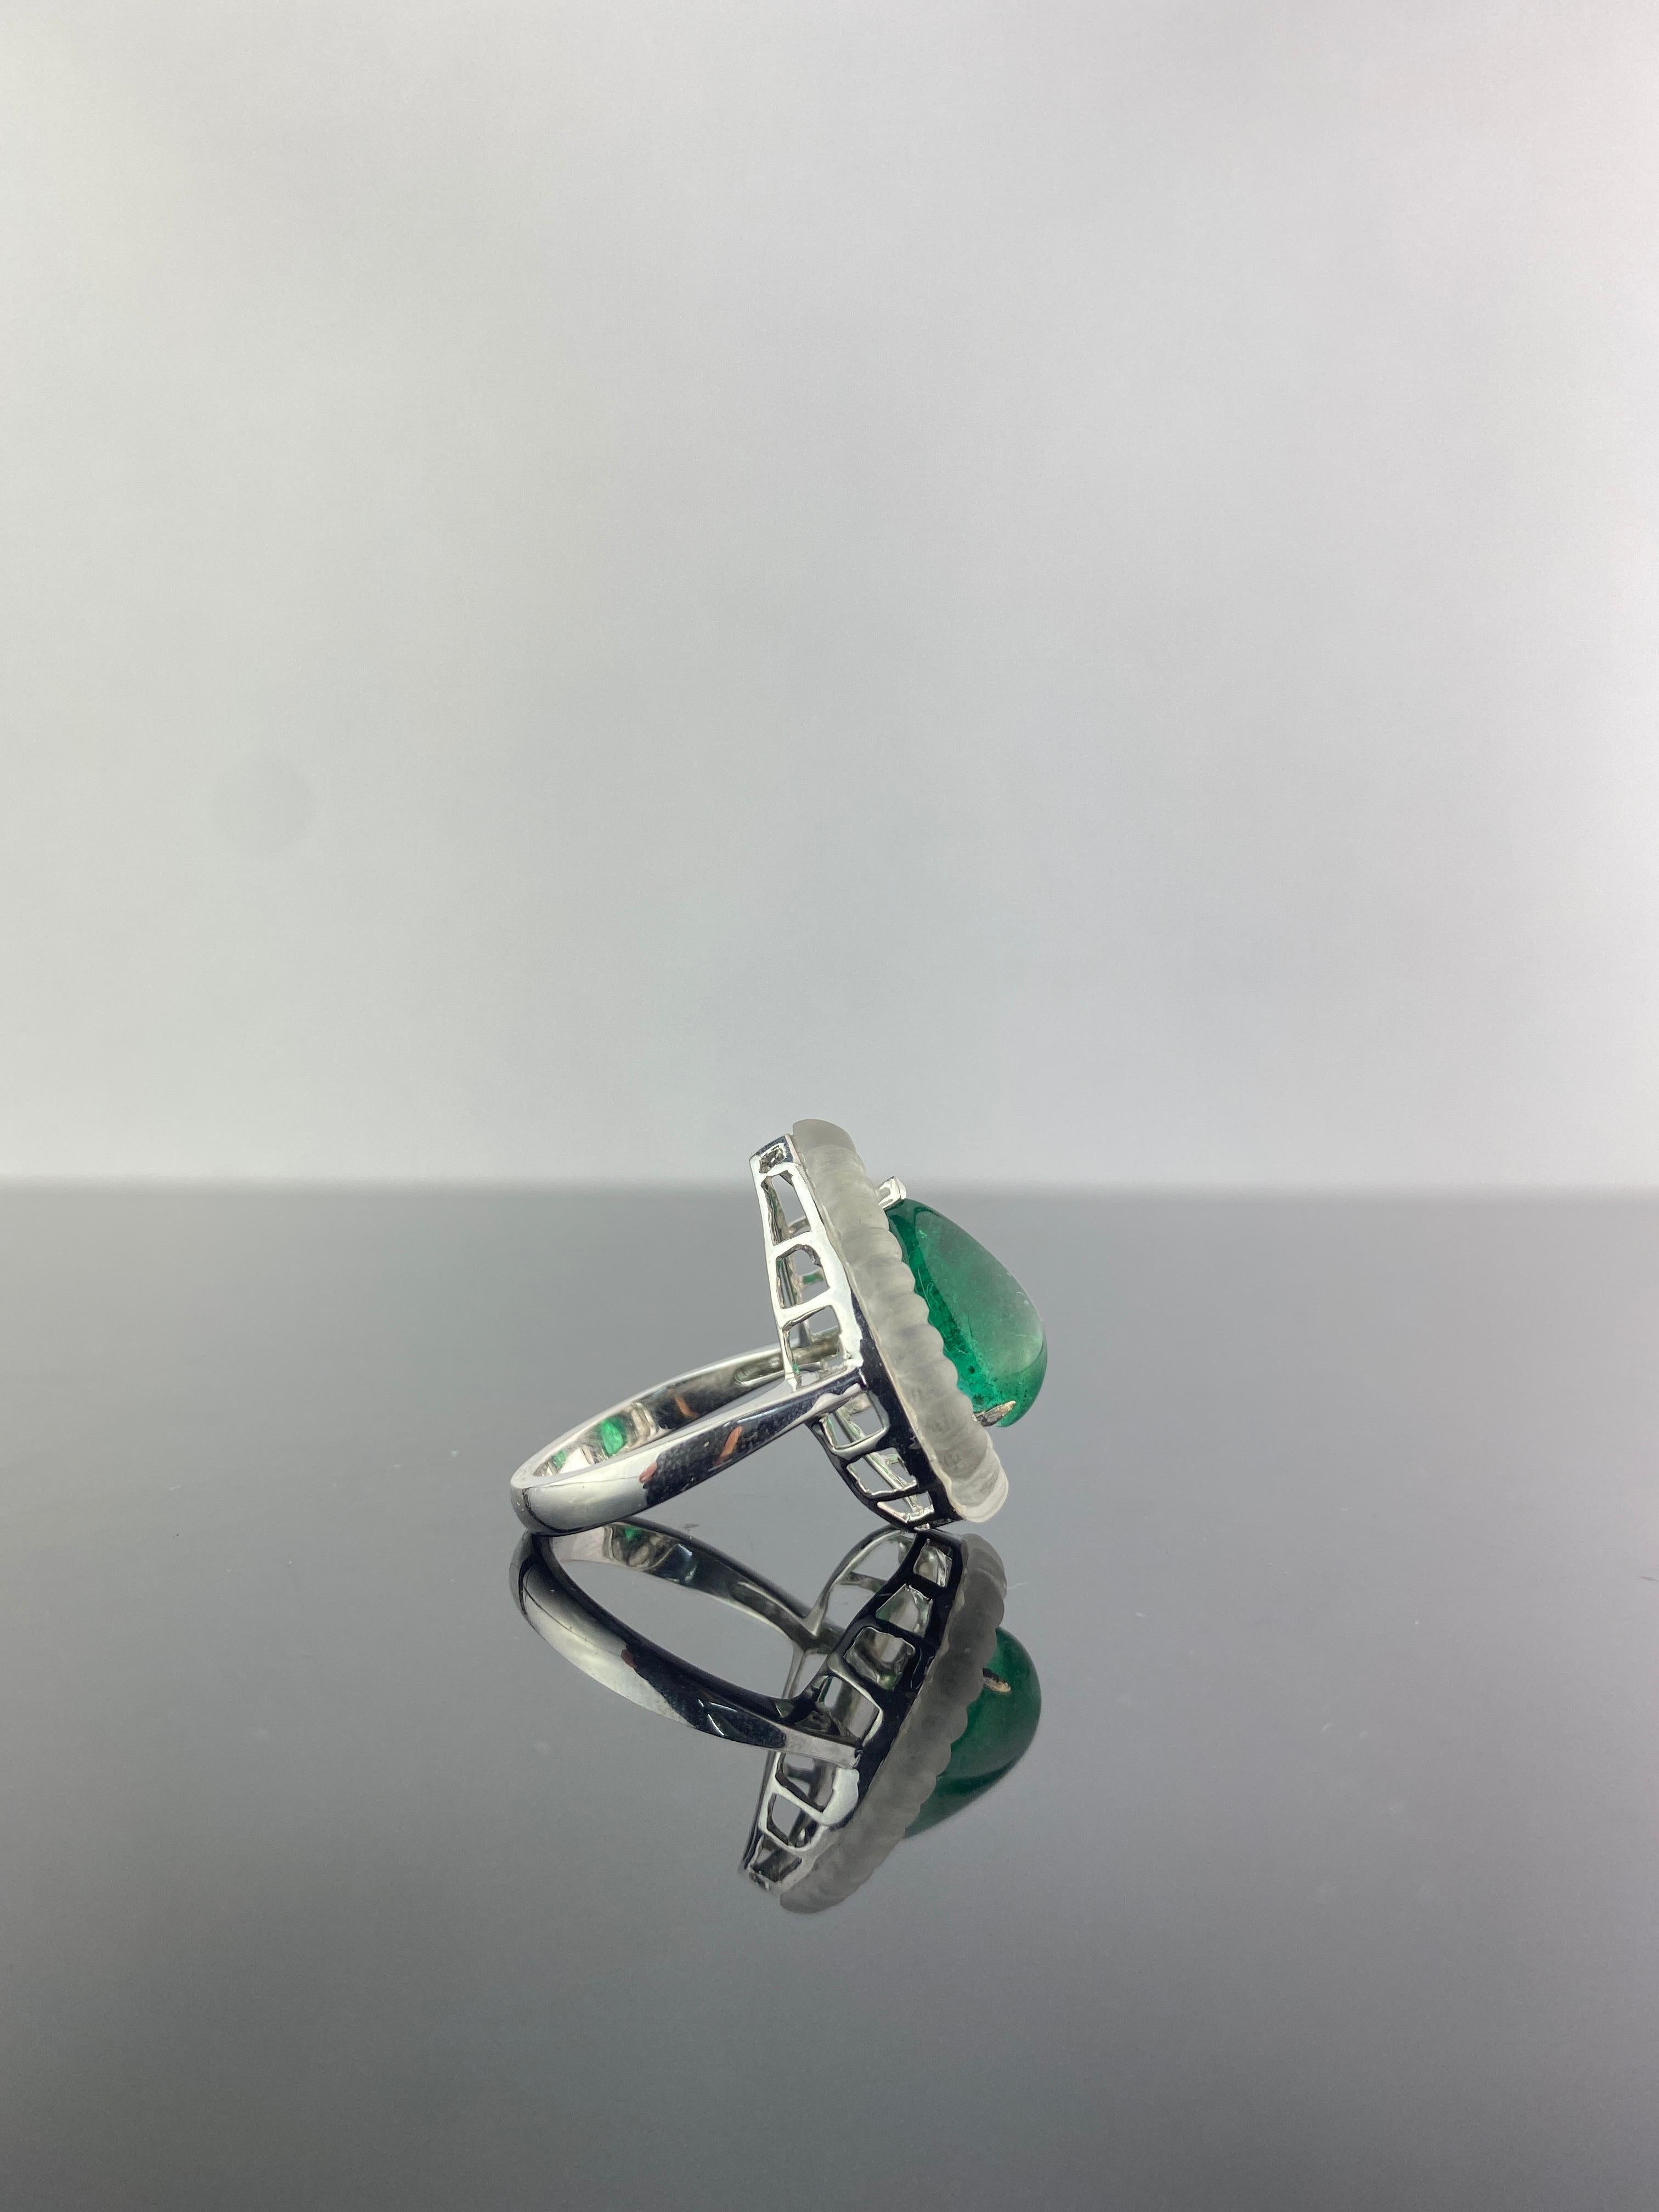 A gorgeous art-deco style looking cocktail ring, with 5.15 carat Emerald Cabochon (transparent, with an ideal color and great luster), outlined with 0.36 carat White Diamonds and intricately cut Rock Crystal. The ring is made in 8.5 grams of solid